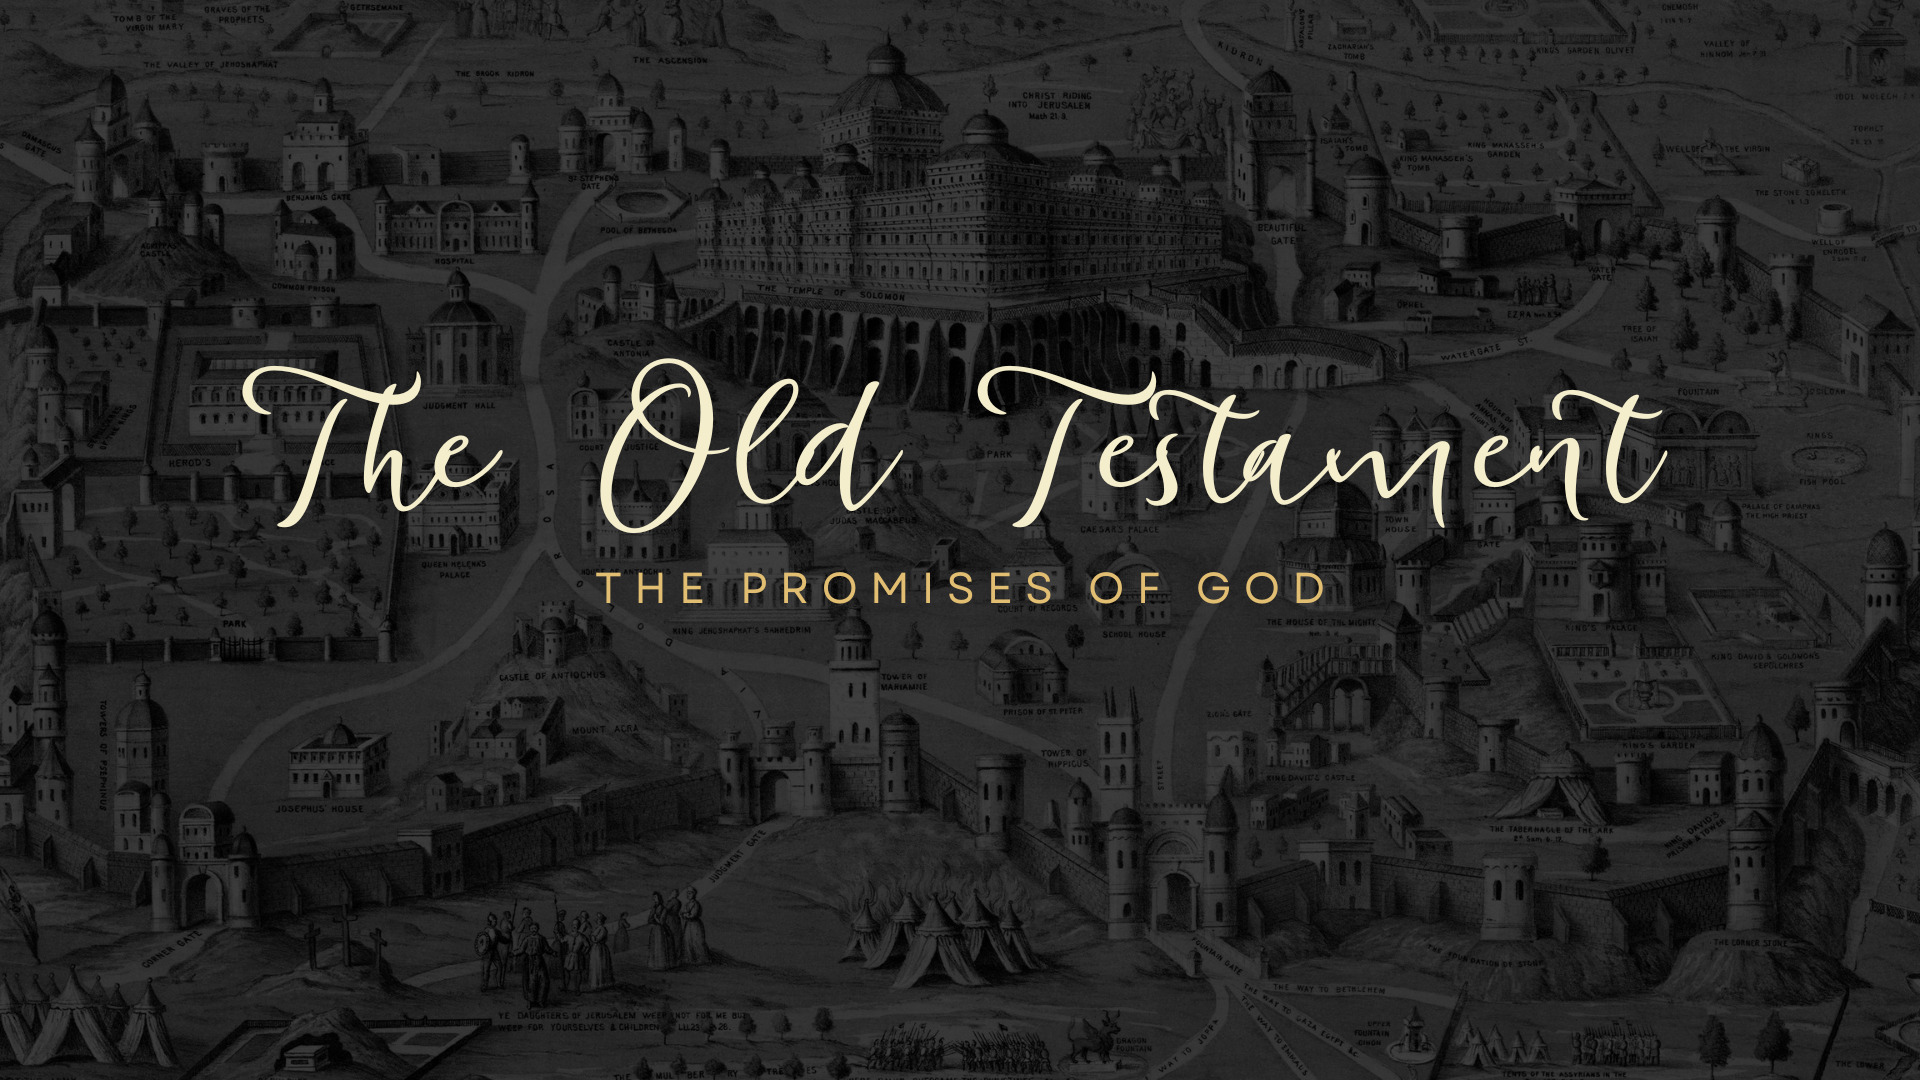 The Old Testament 4K 3840 × 2160 Px | Remix Church Media | Editable Design Templates And Resources Made For The Church.